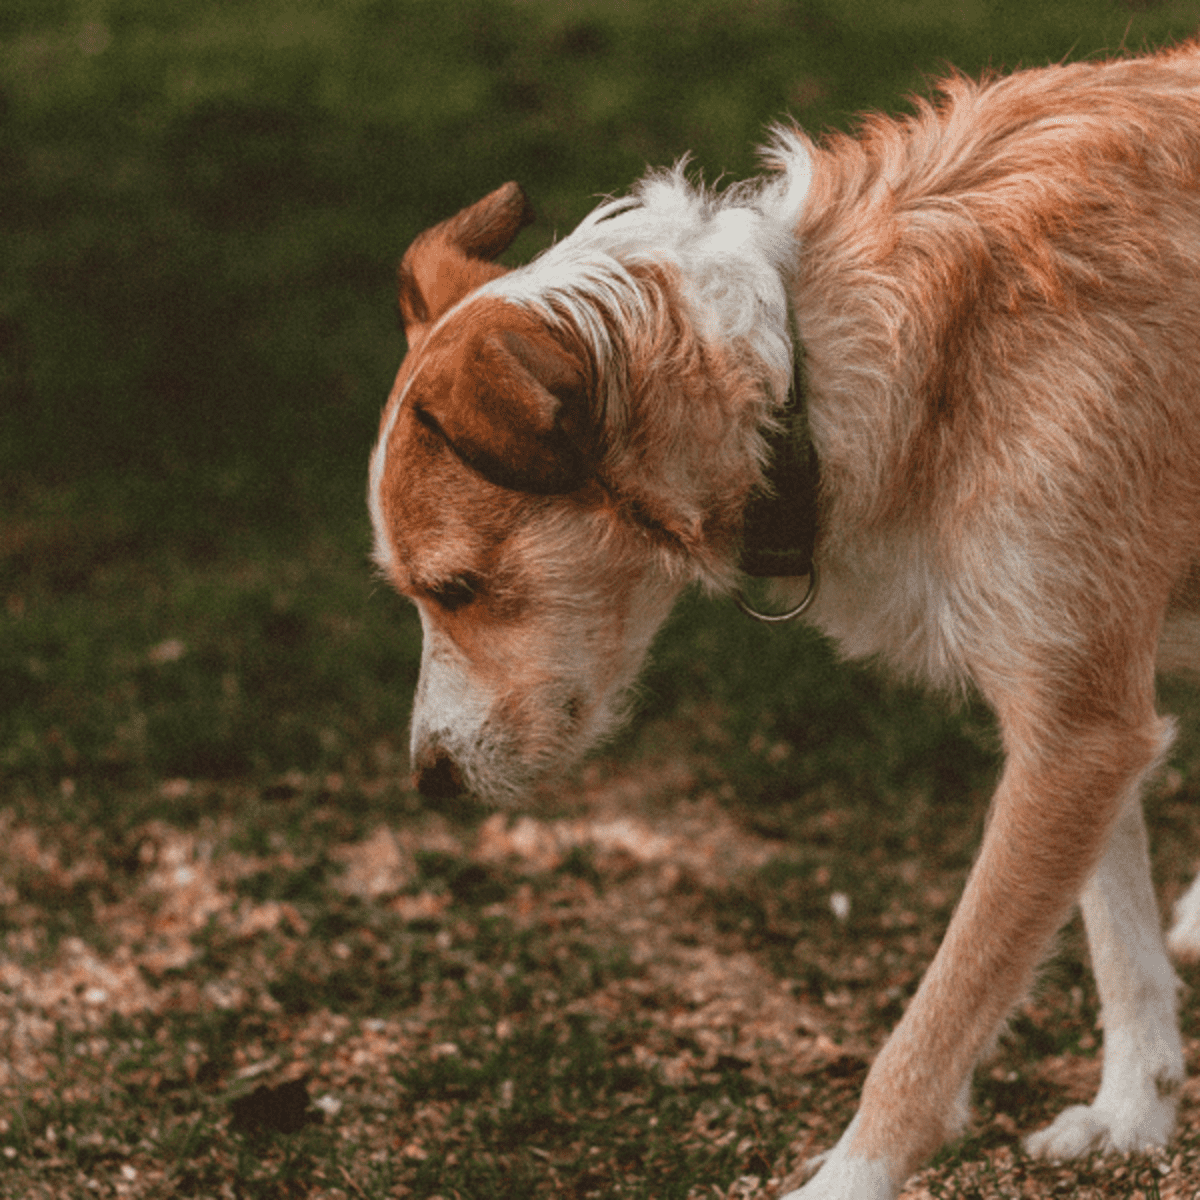 how to stop a dog from throwing up bile